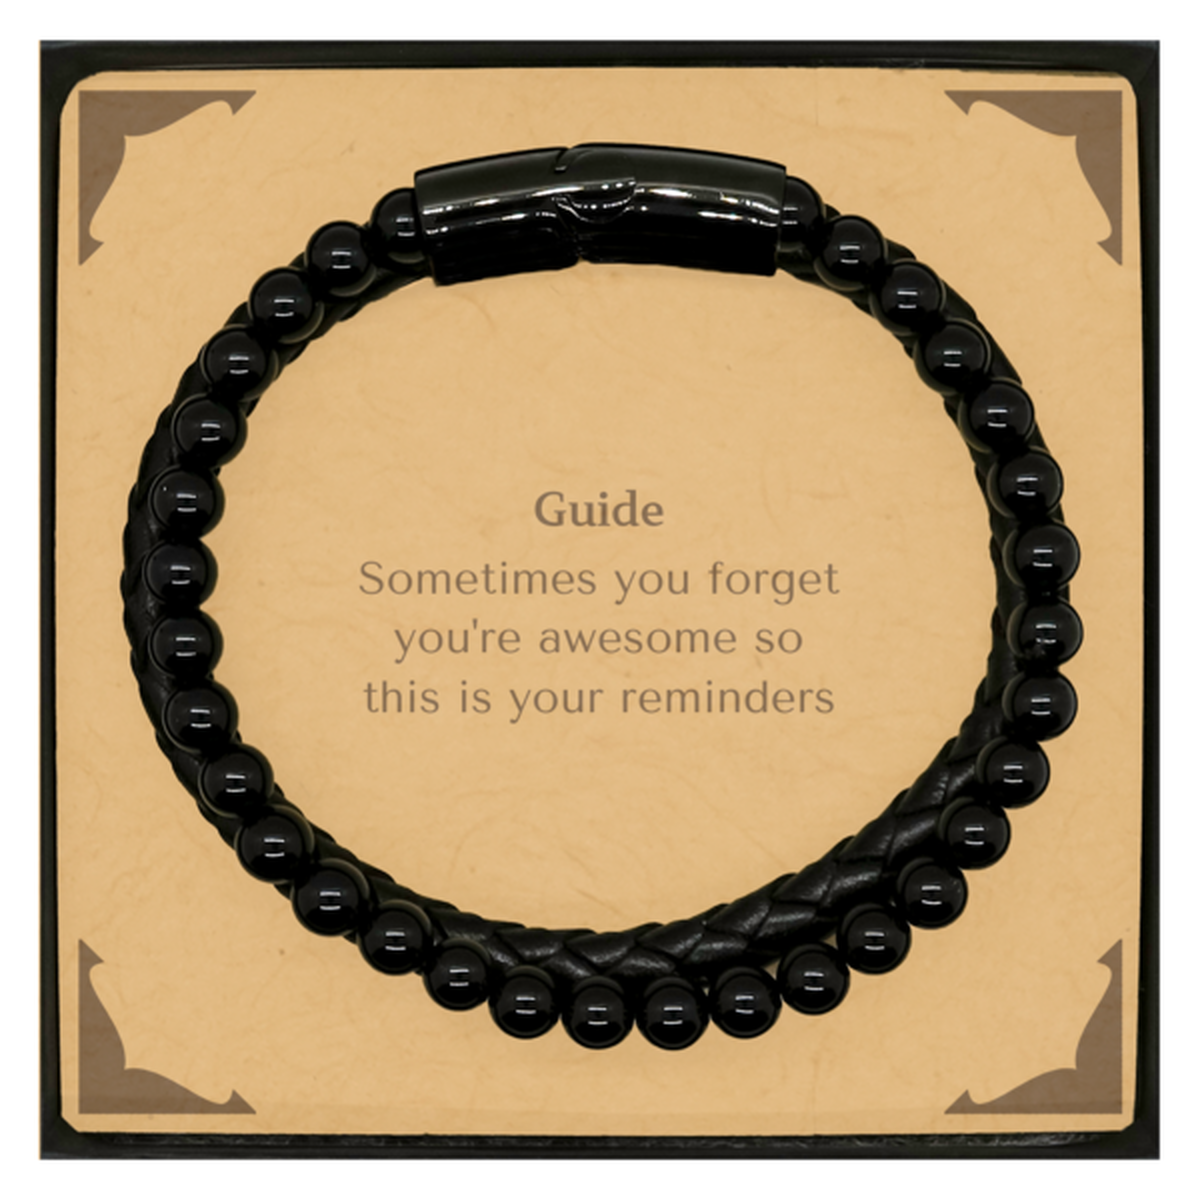 Sentimental Guide Stone Leather Bracelets, Guide Sometimes you forget you're awesome so this is your reminders, Graduation Christmas Birthday Gifts for Guide, Men, Women, Coworkers